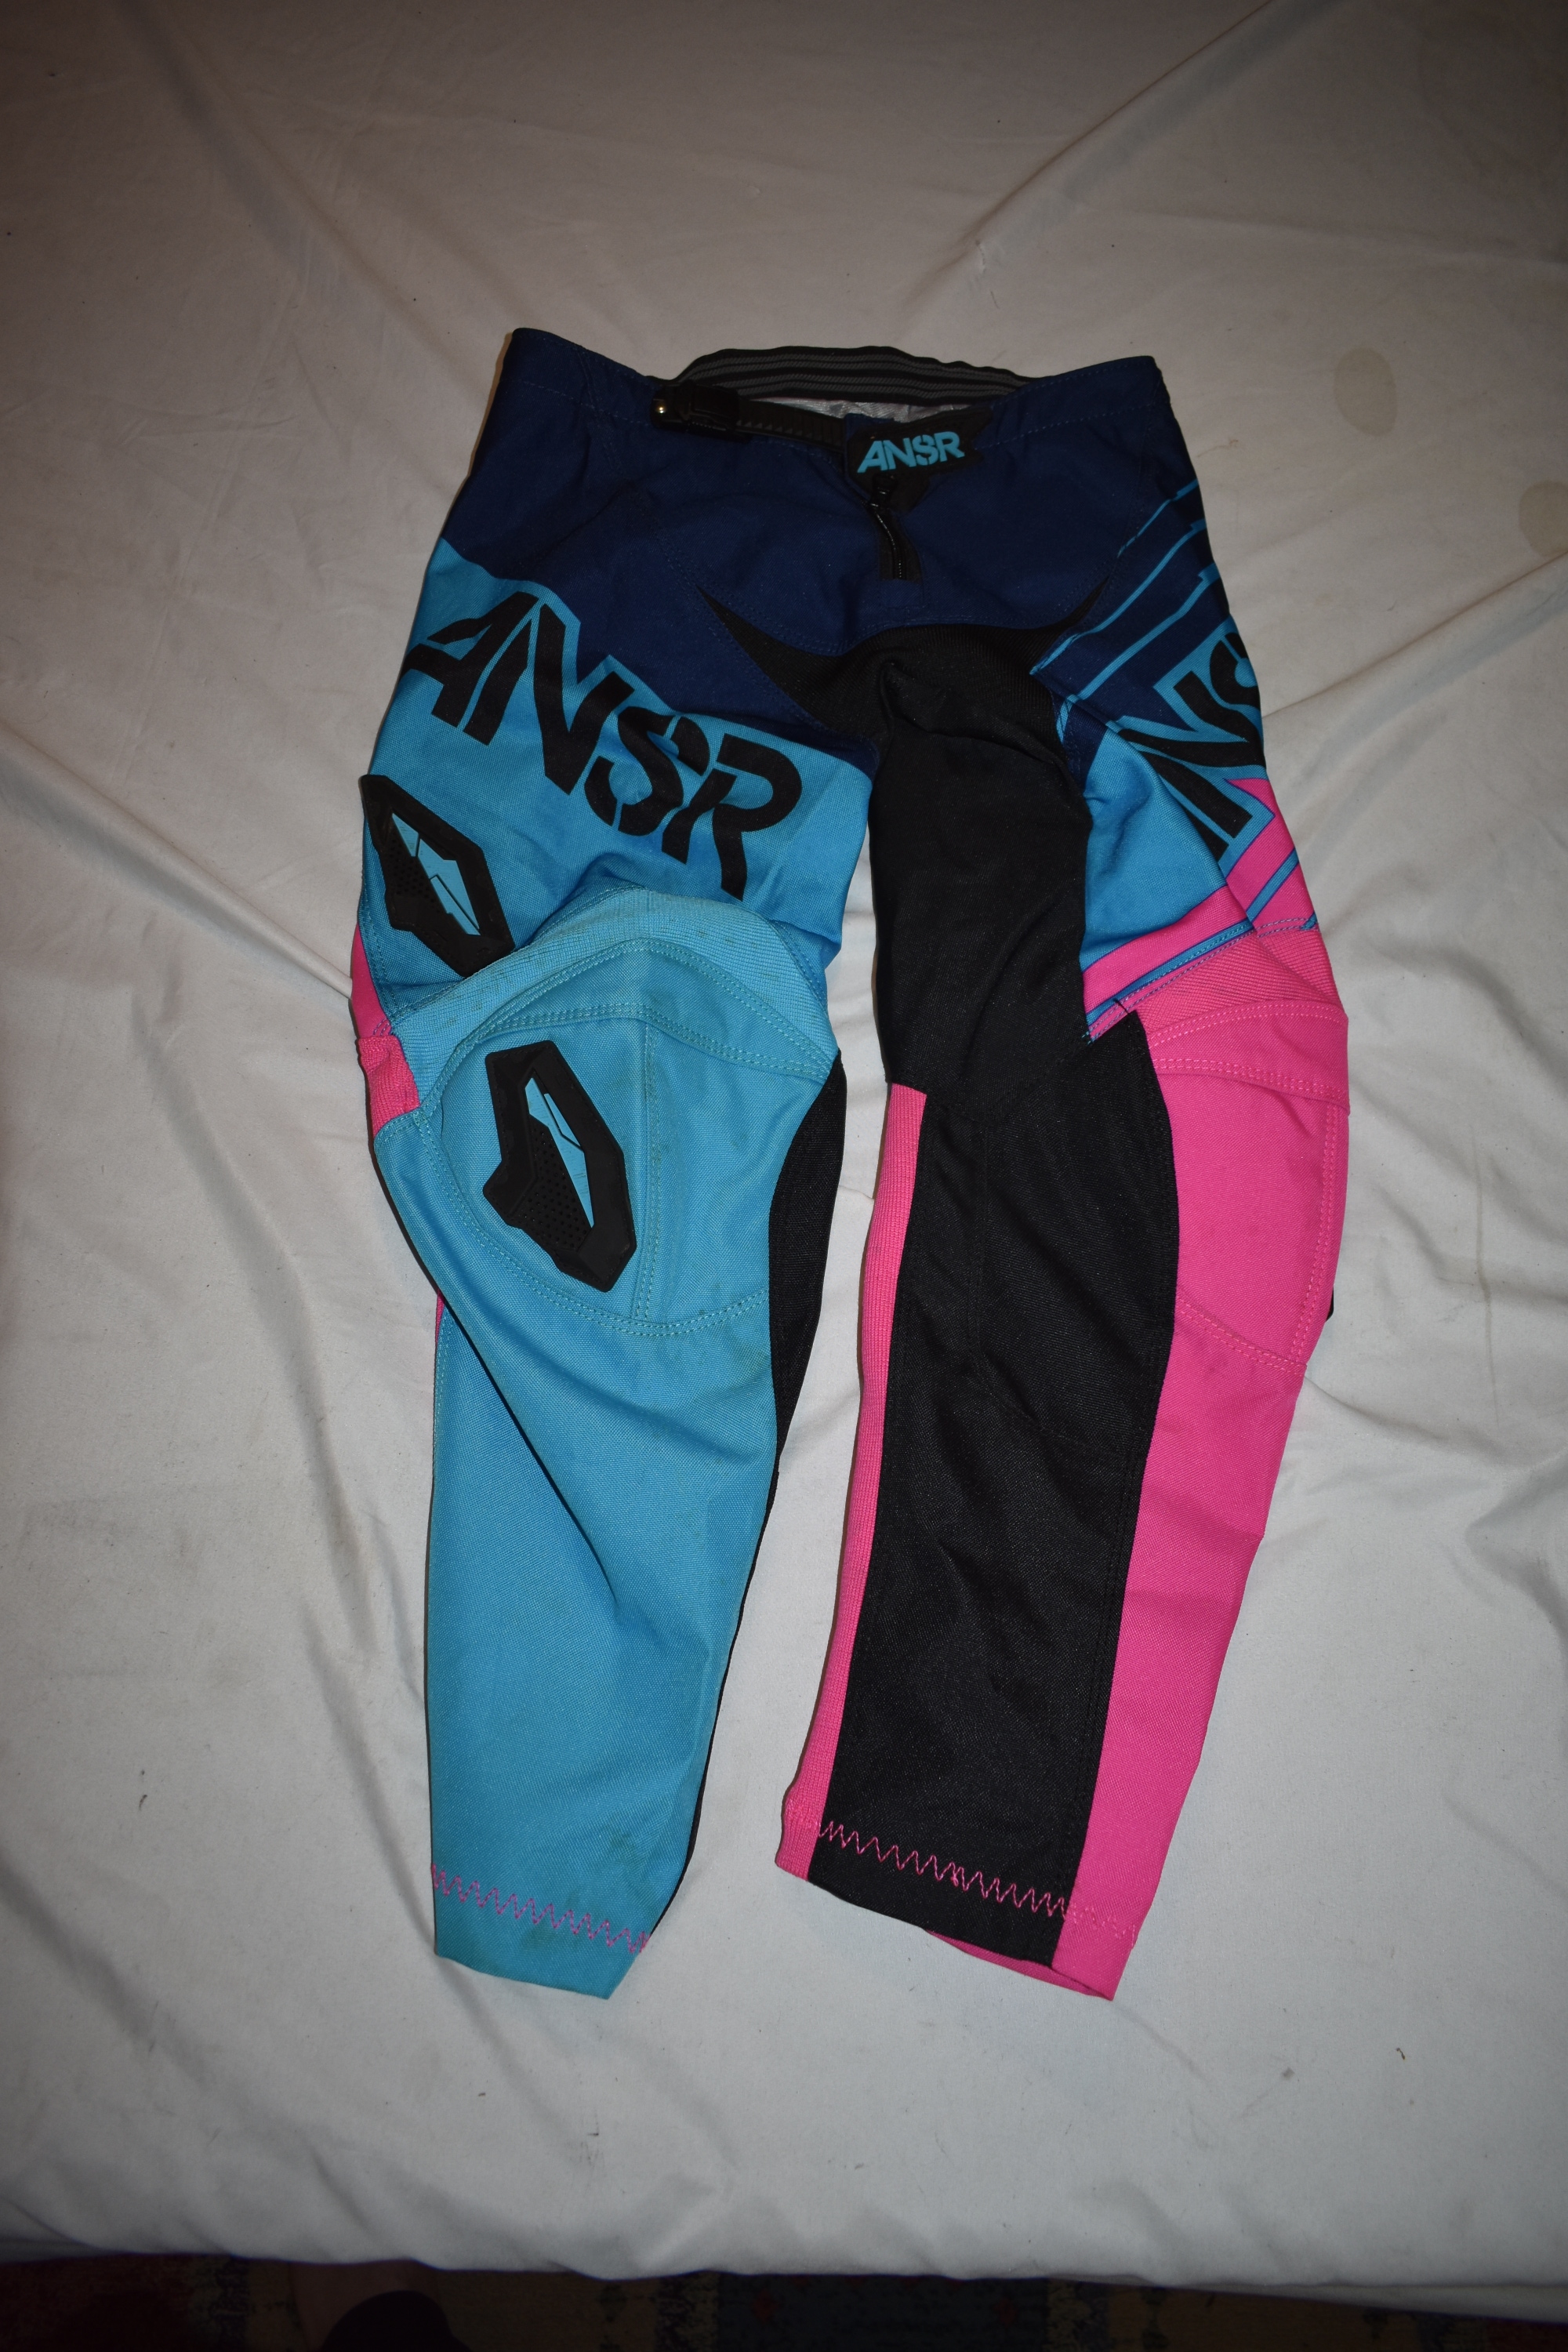 ANSWER Youth Synchron Series Motocross Pants, Size 26 - Great Condition!